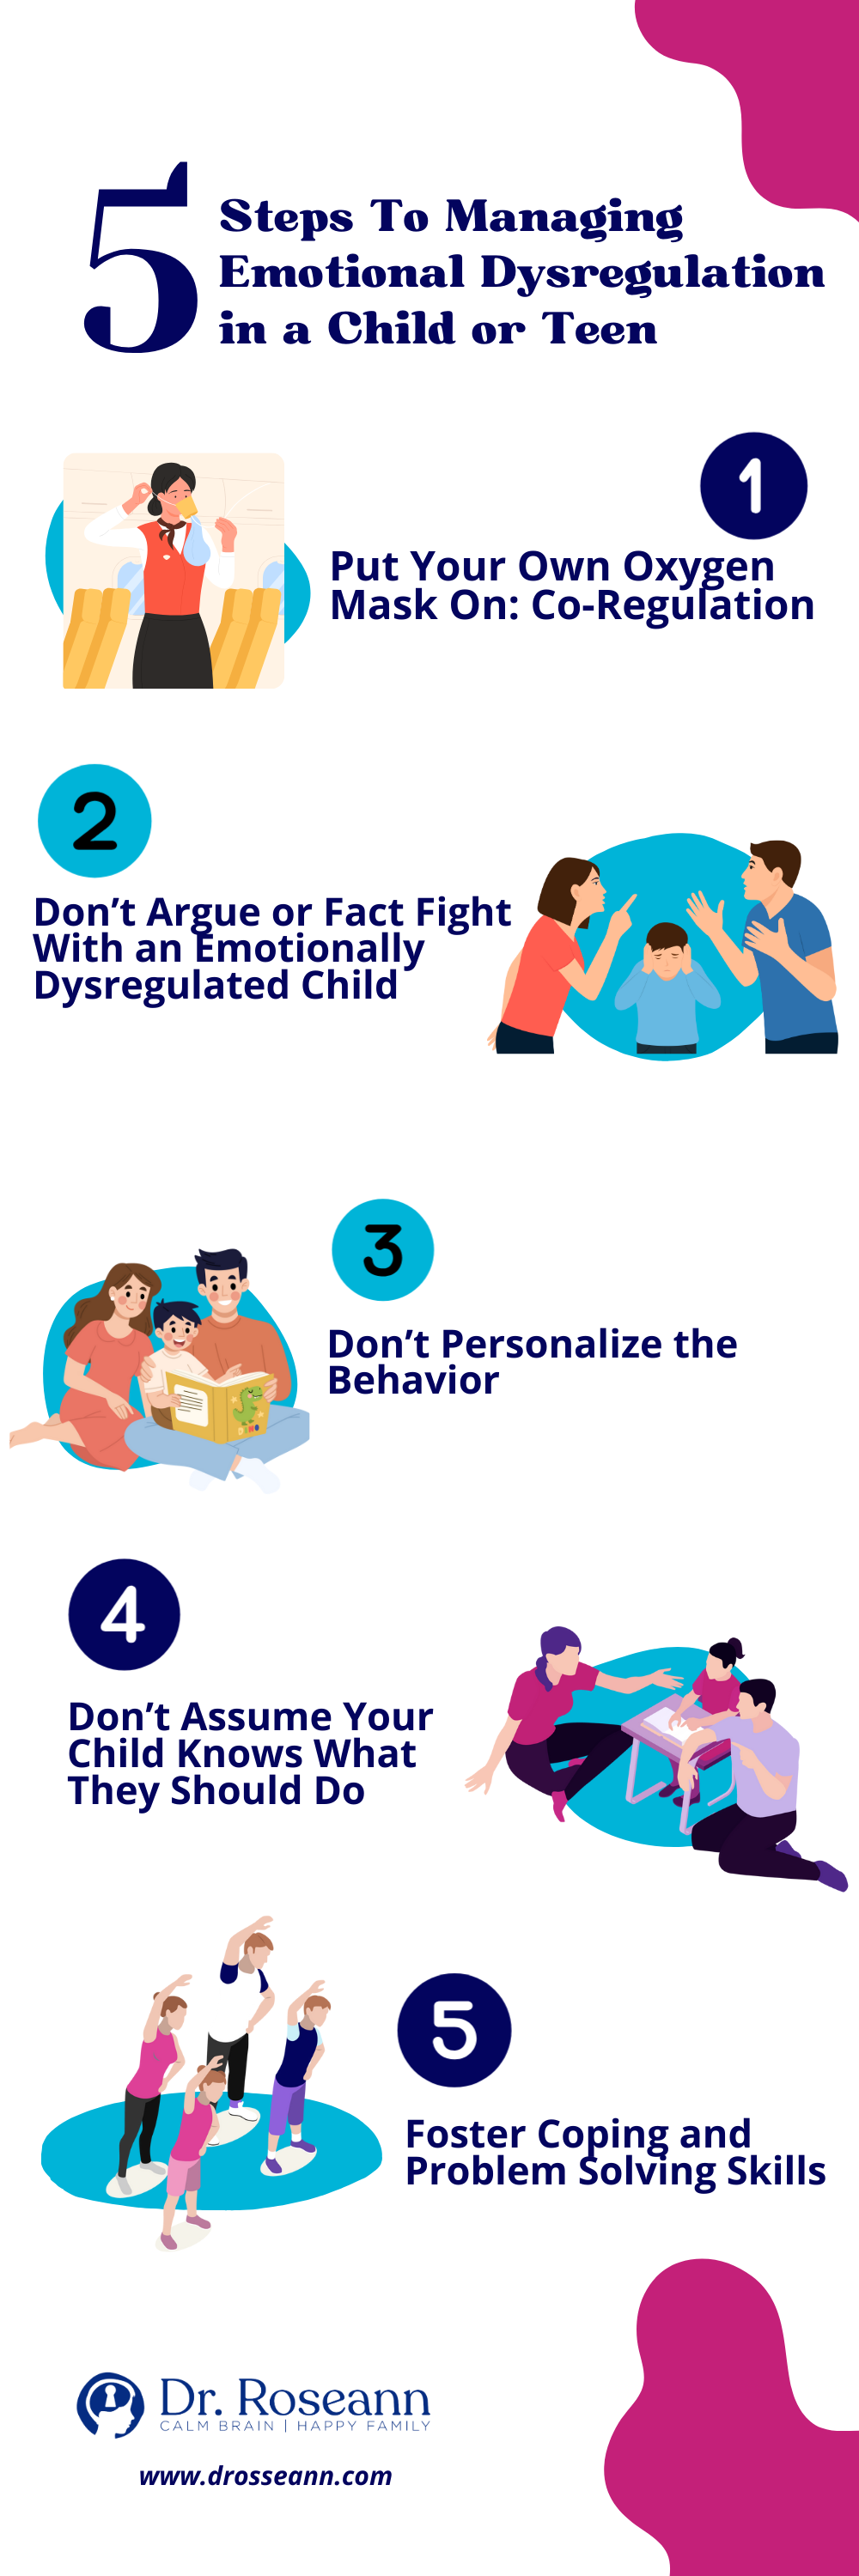 5 Steps to Managing Emotional Dysregulation in a Child or Teen